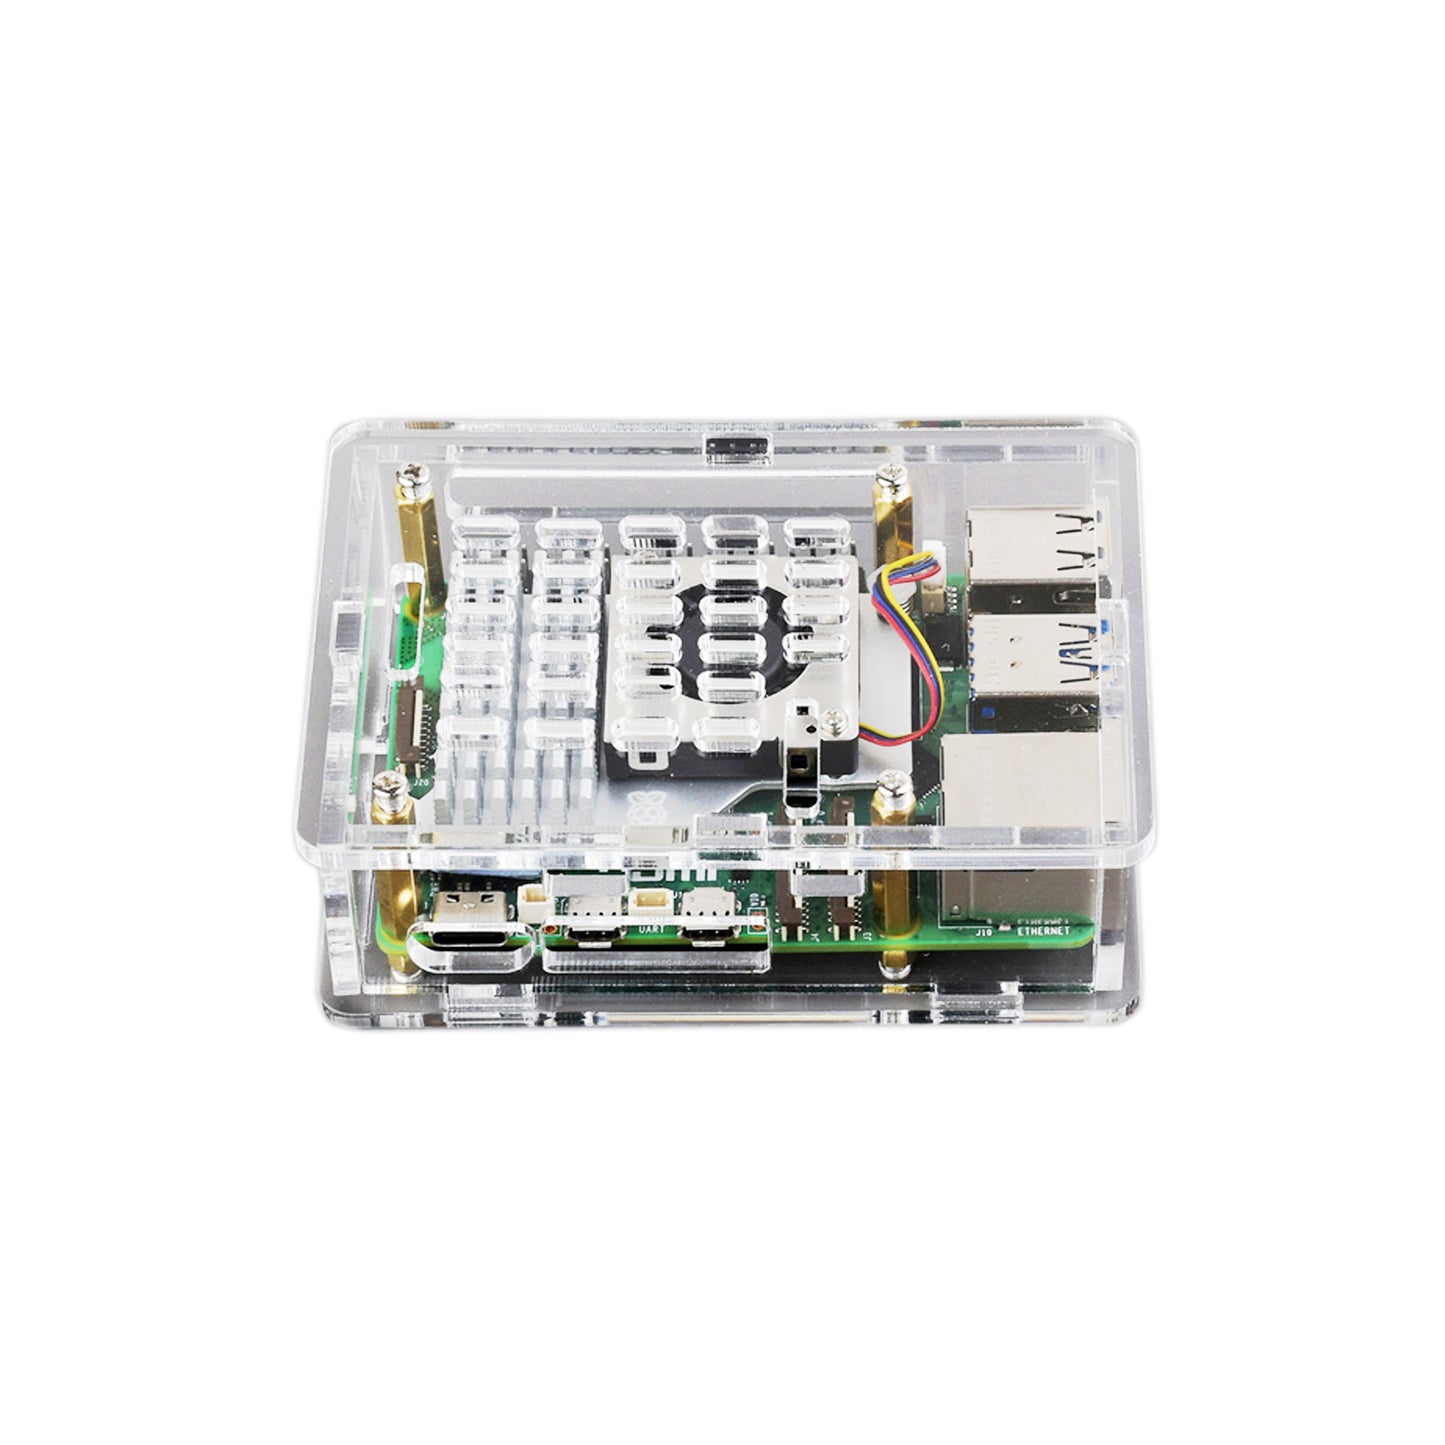 Raspberry Pi 5 Case Clear Acrylic Case for Raspberry Pi 5, Supports Installing Official Active Cooler - RS5785 - REES52